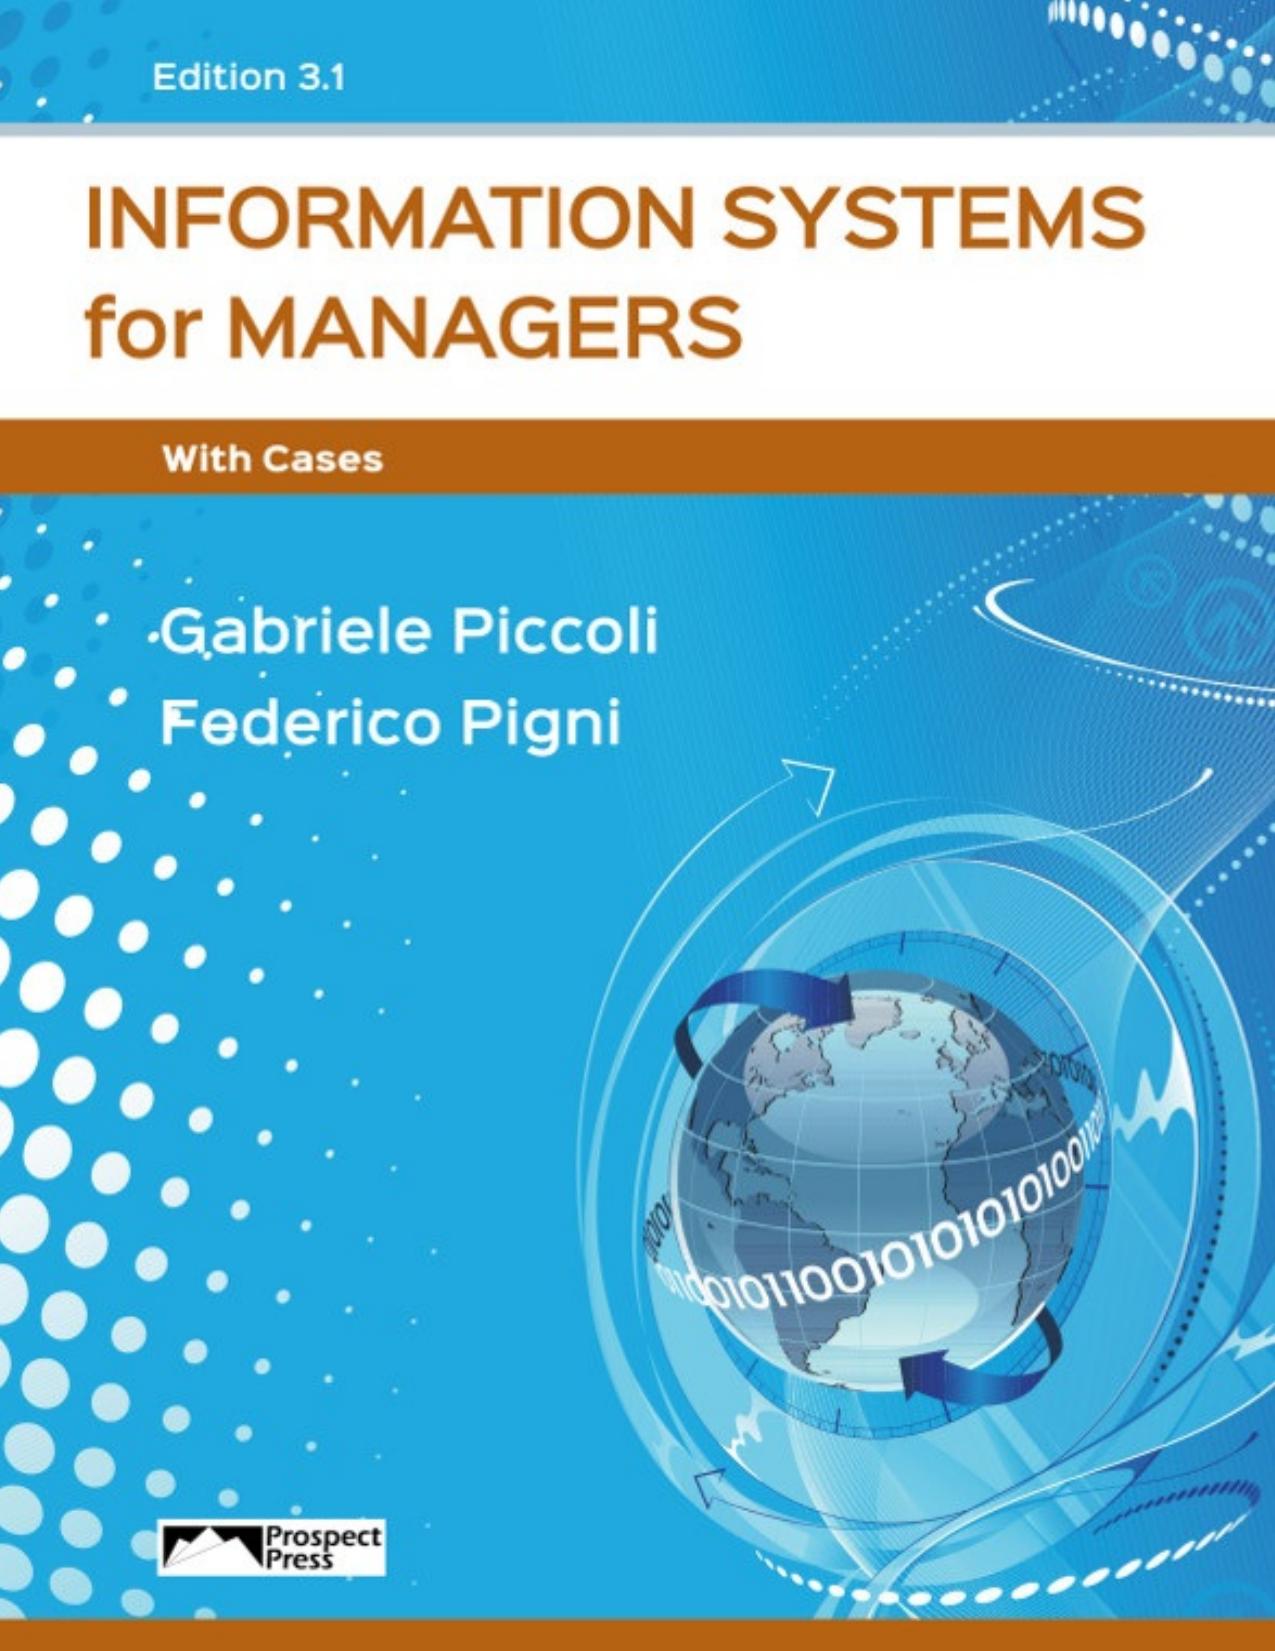 Information Systems for Managers with Cases, Edition 3.1